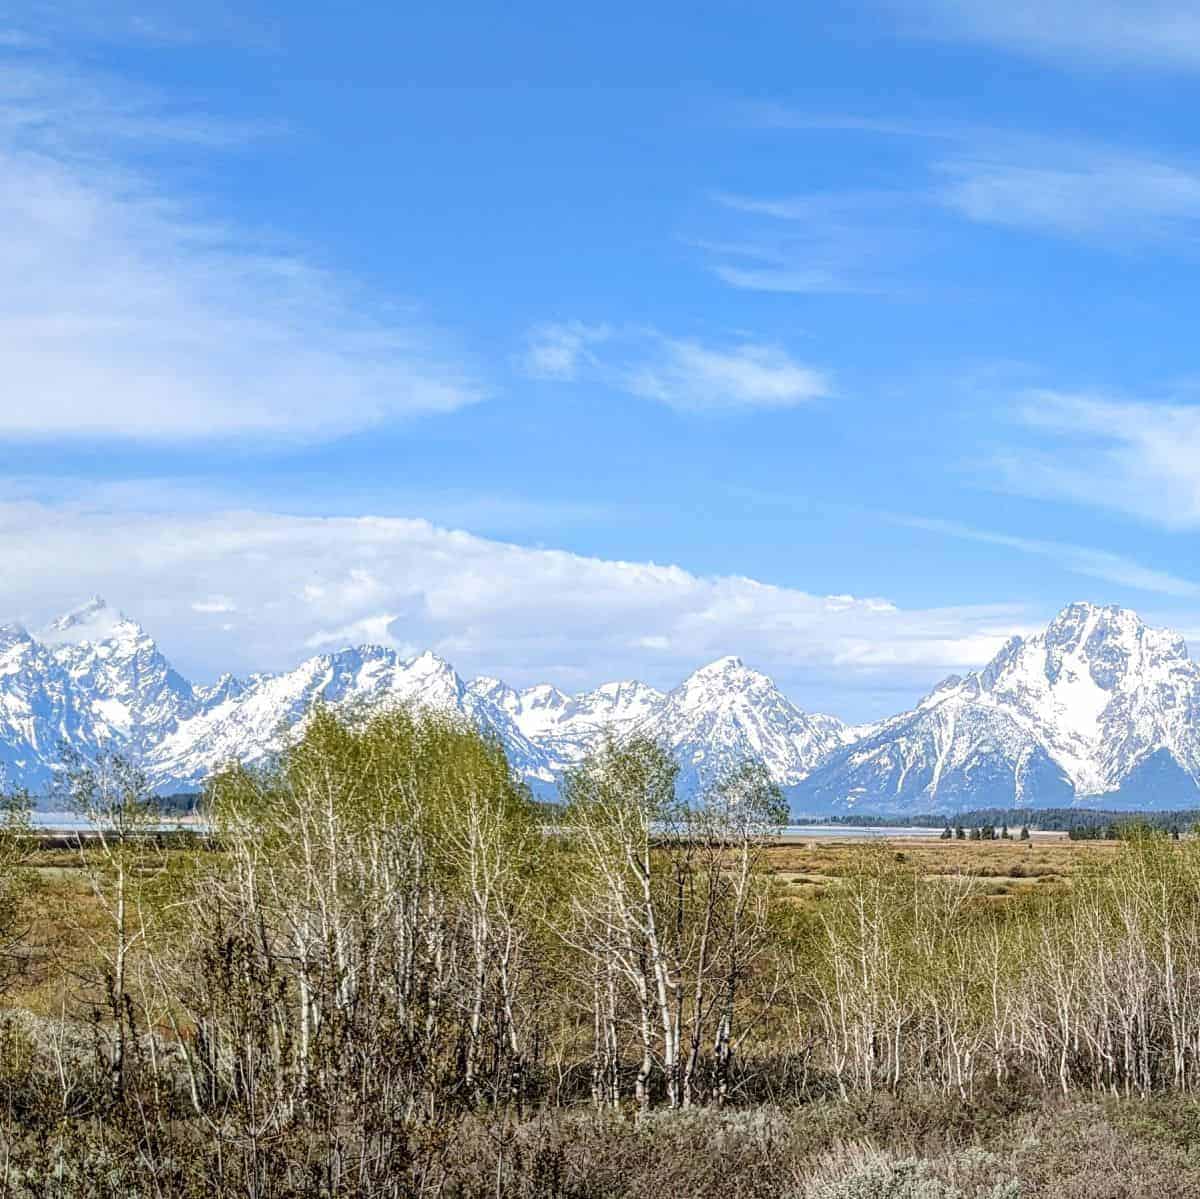 view of the Teton mountains beyond willow trees and a wet meadow with Jackson Lake visible at the horizon